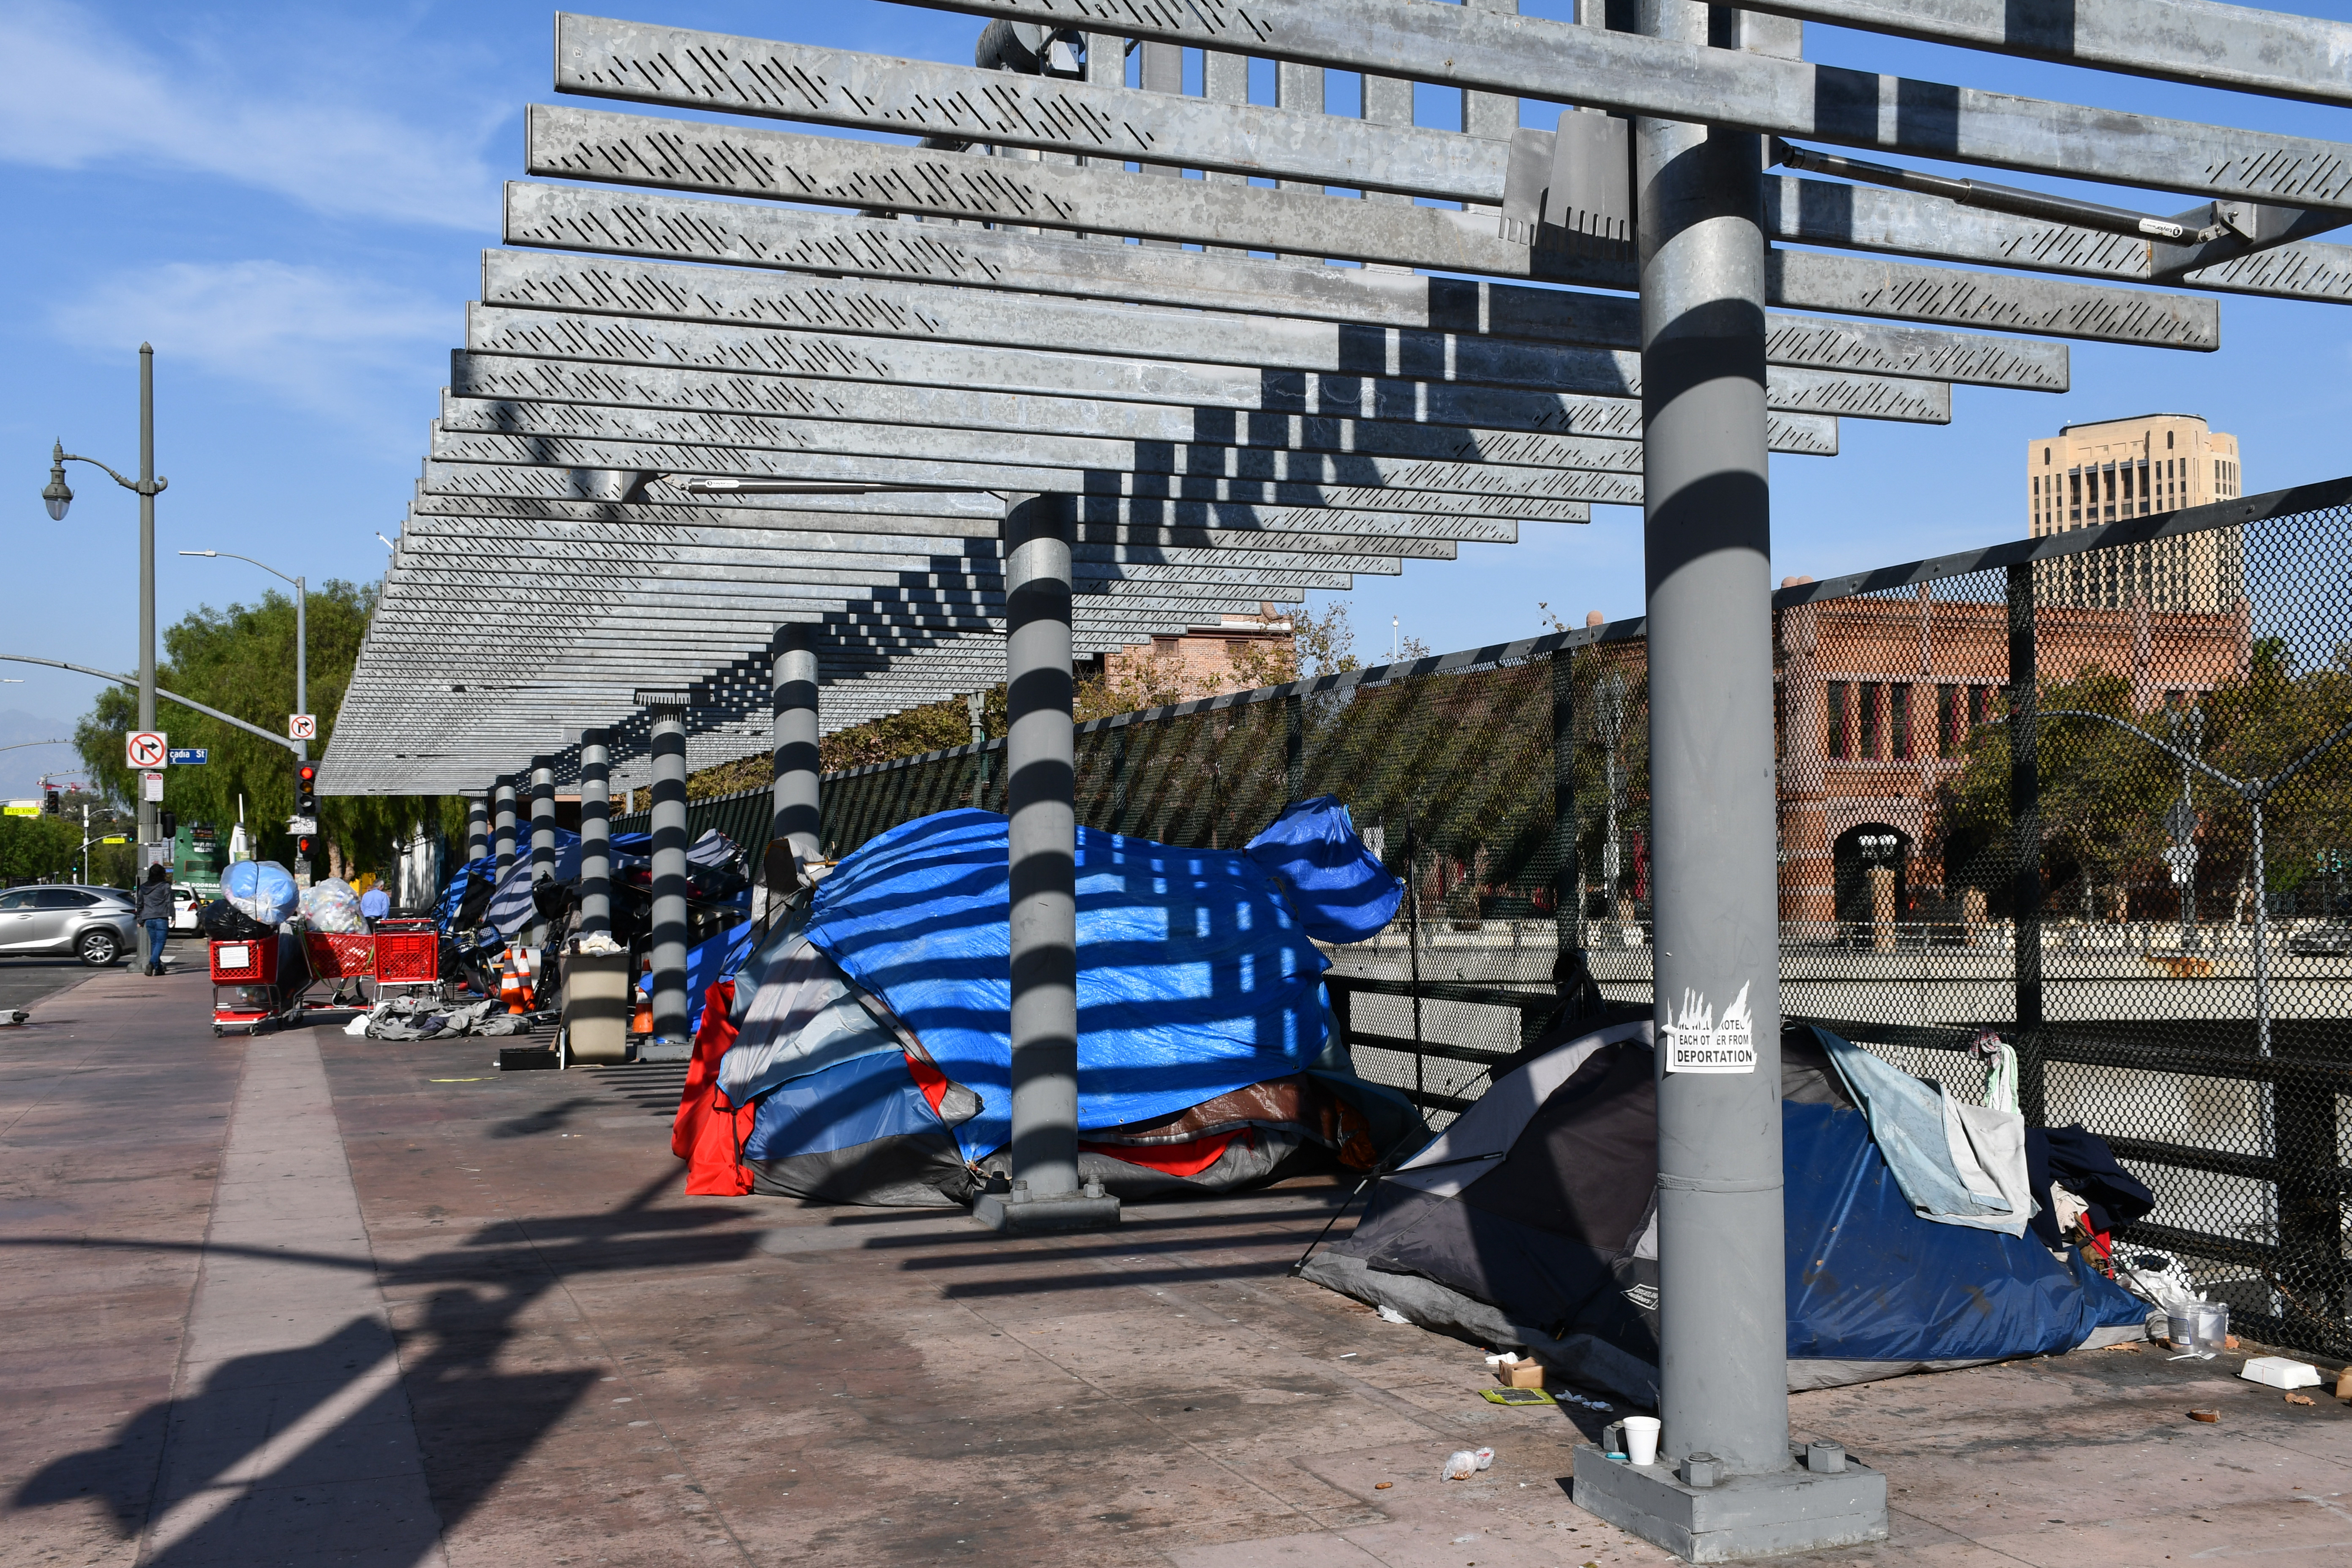 Row of makeshift tents and belongings under a shaded structure along a sidewalk, with buildings in the background